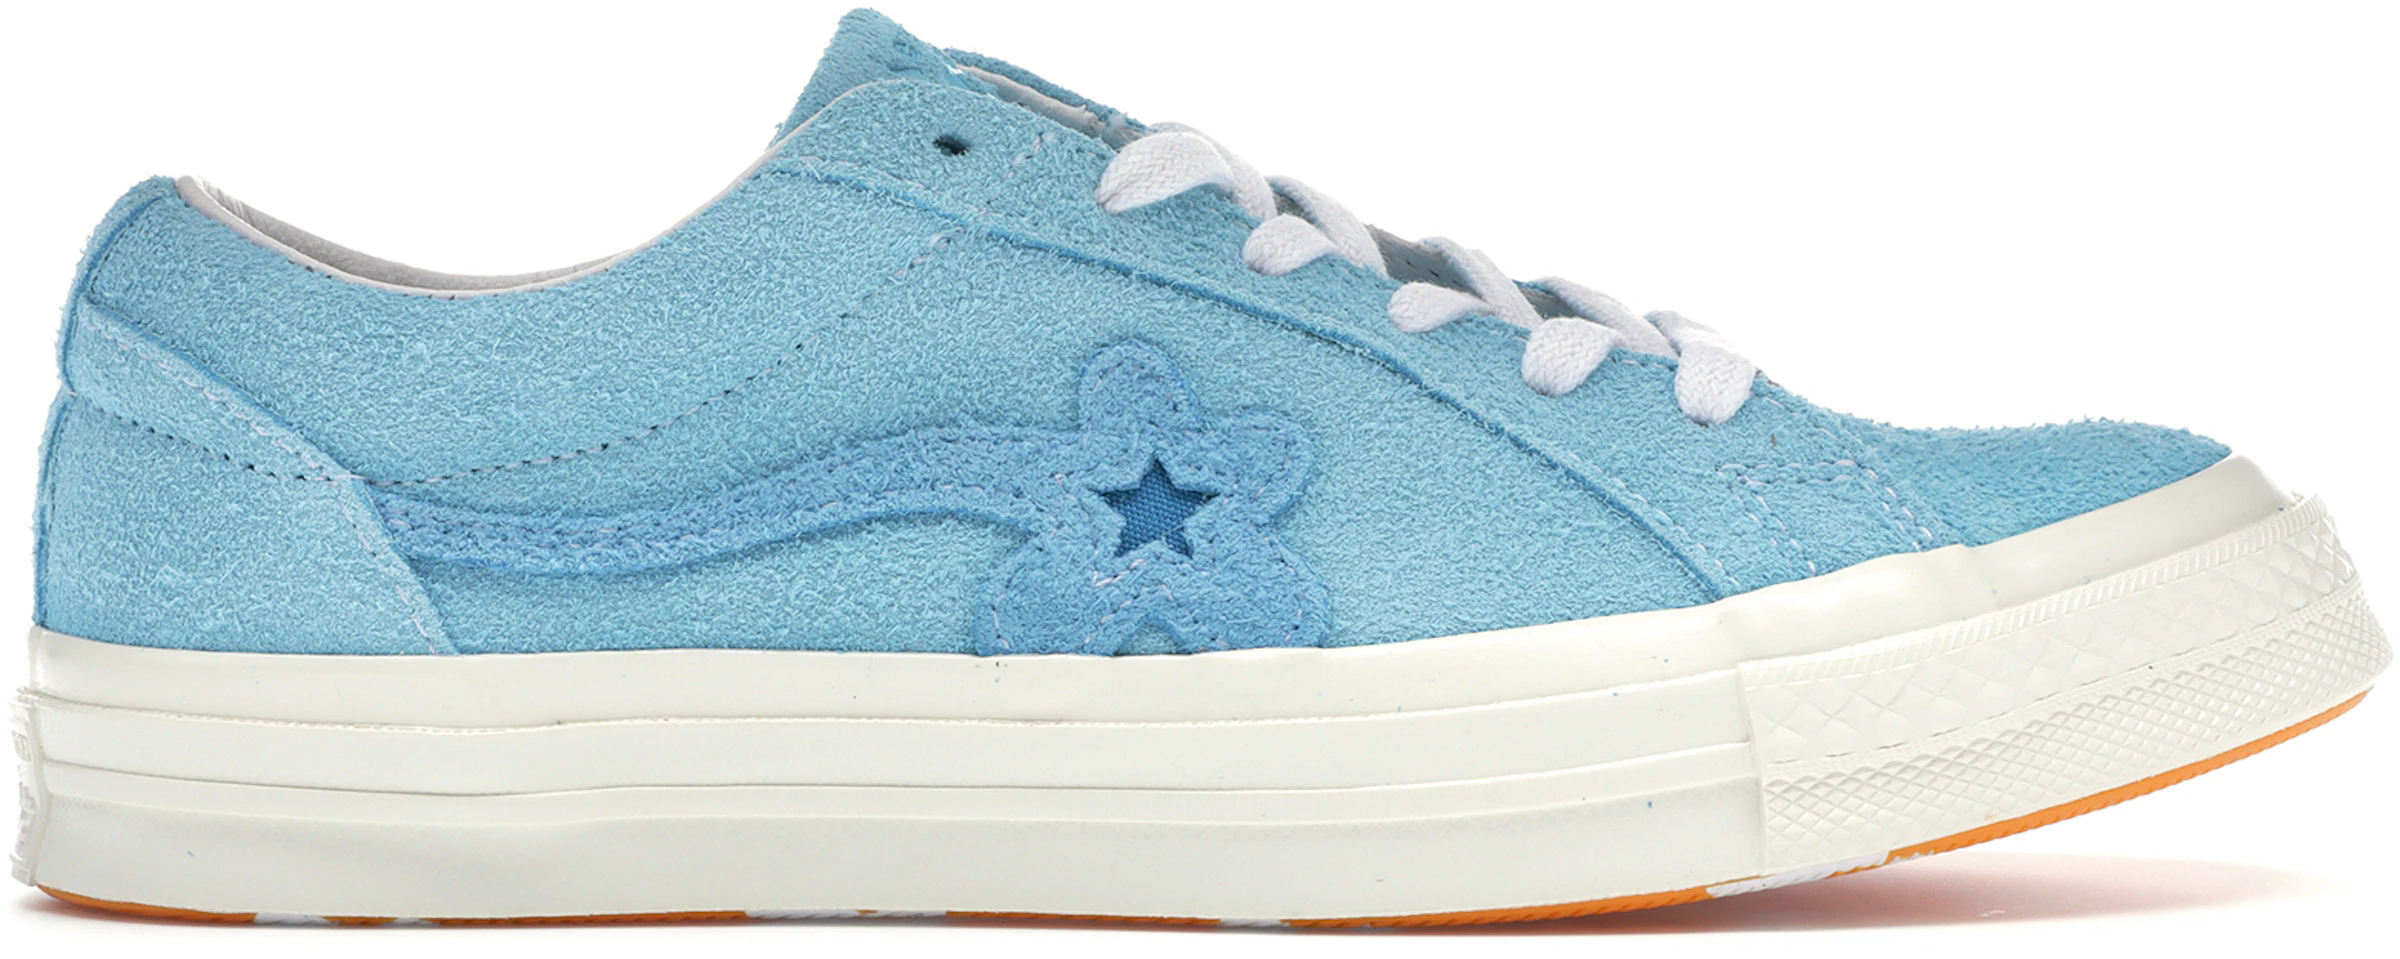 Converse One Star Ox Tyler the Creator Le Bachelor - - ES